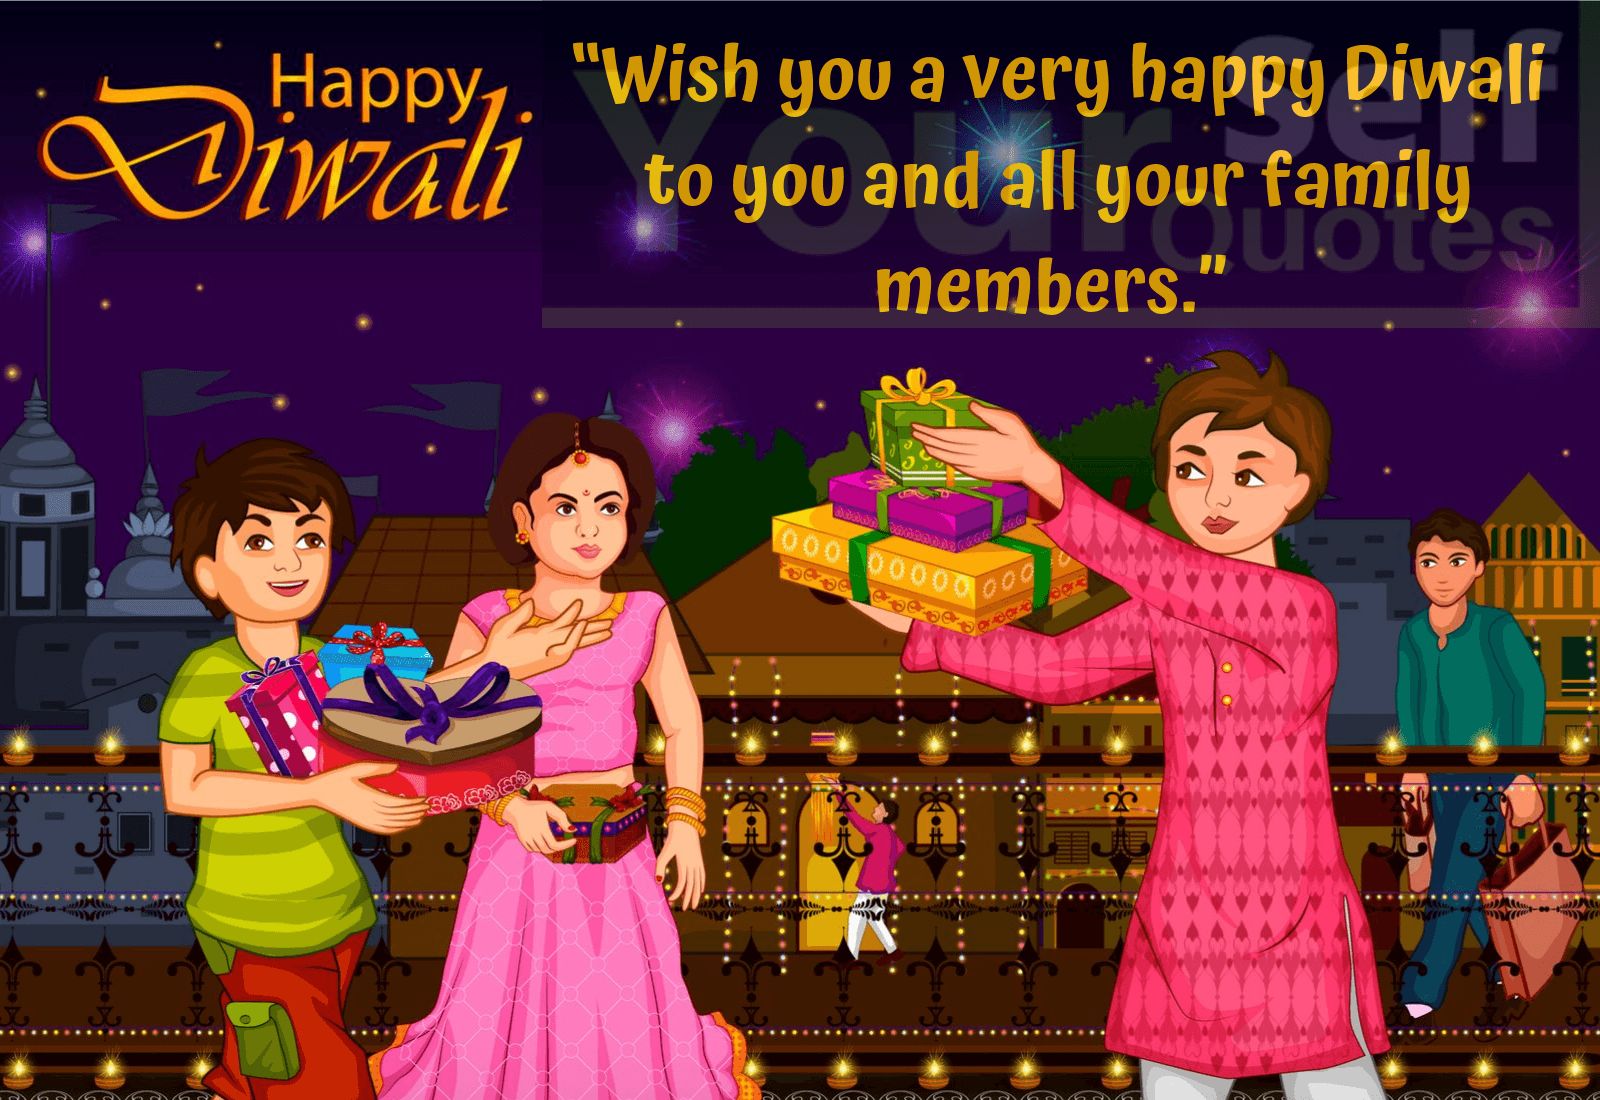 Happy Diwali Wishes Images For Family